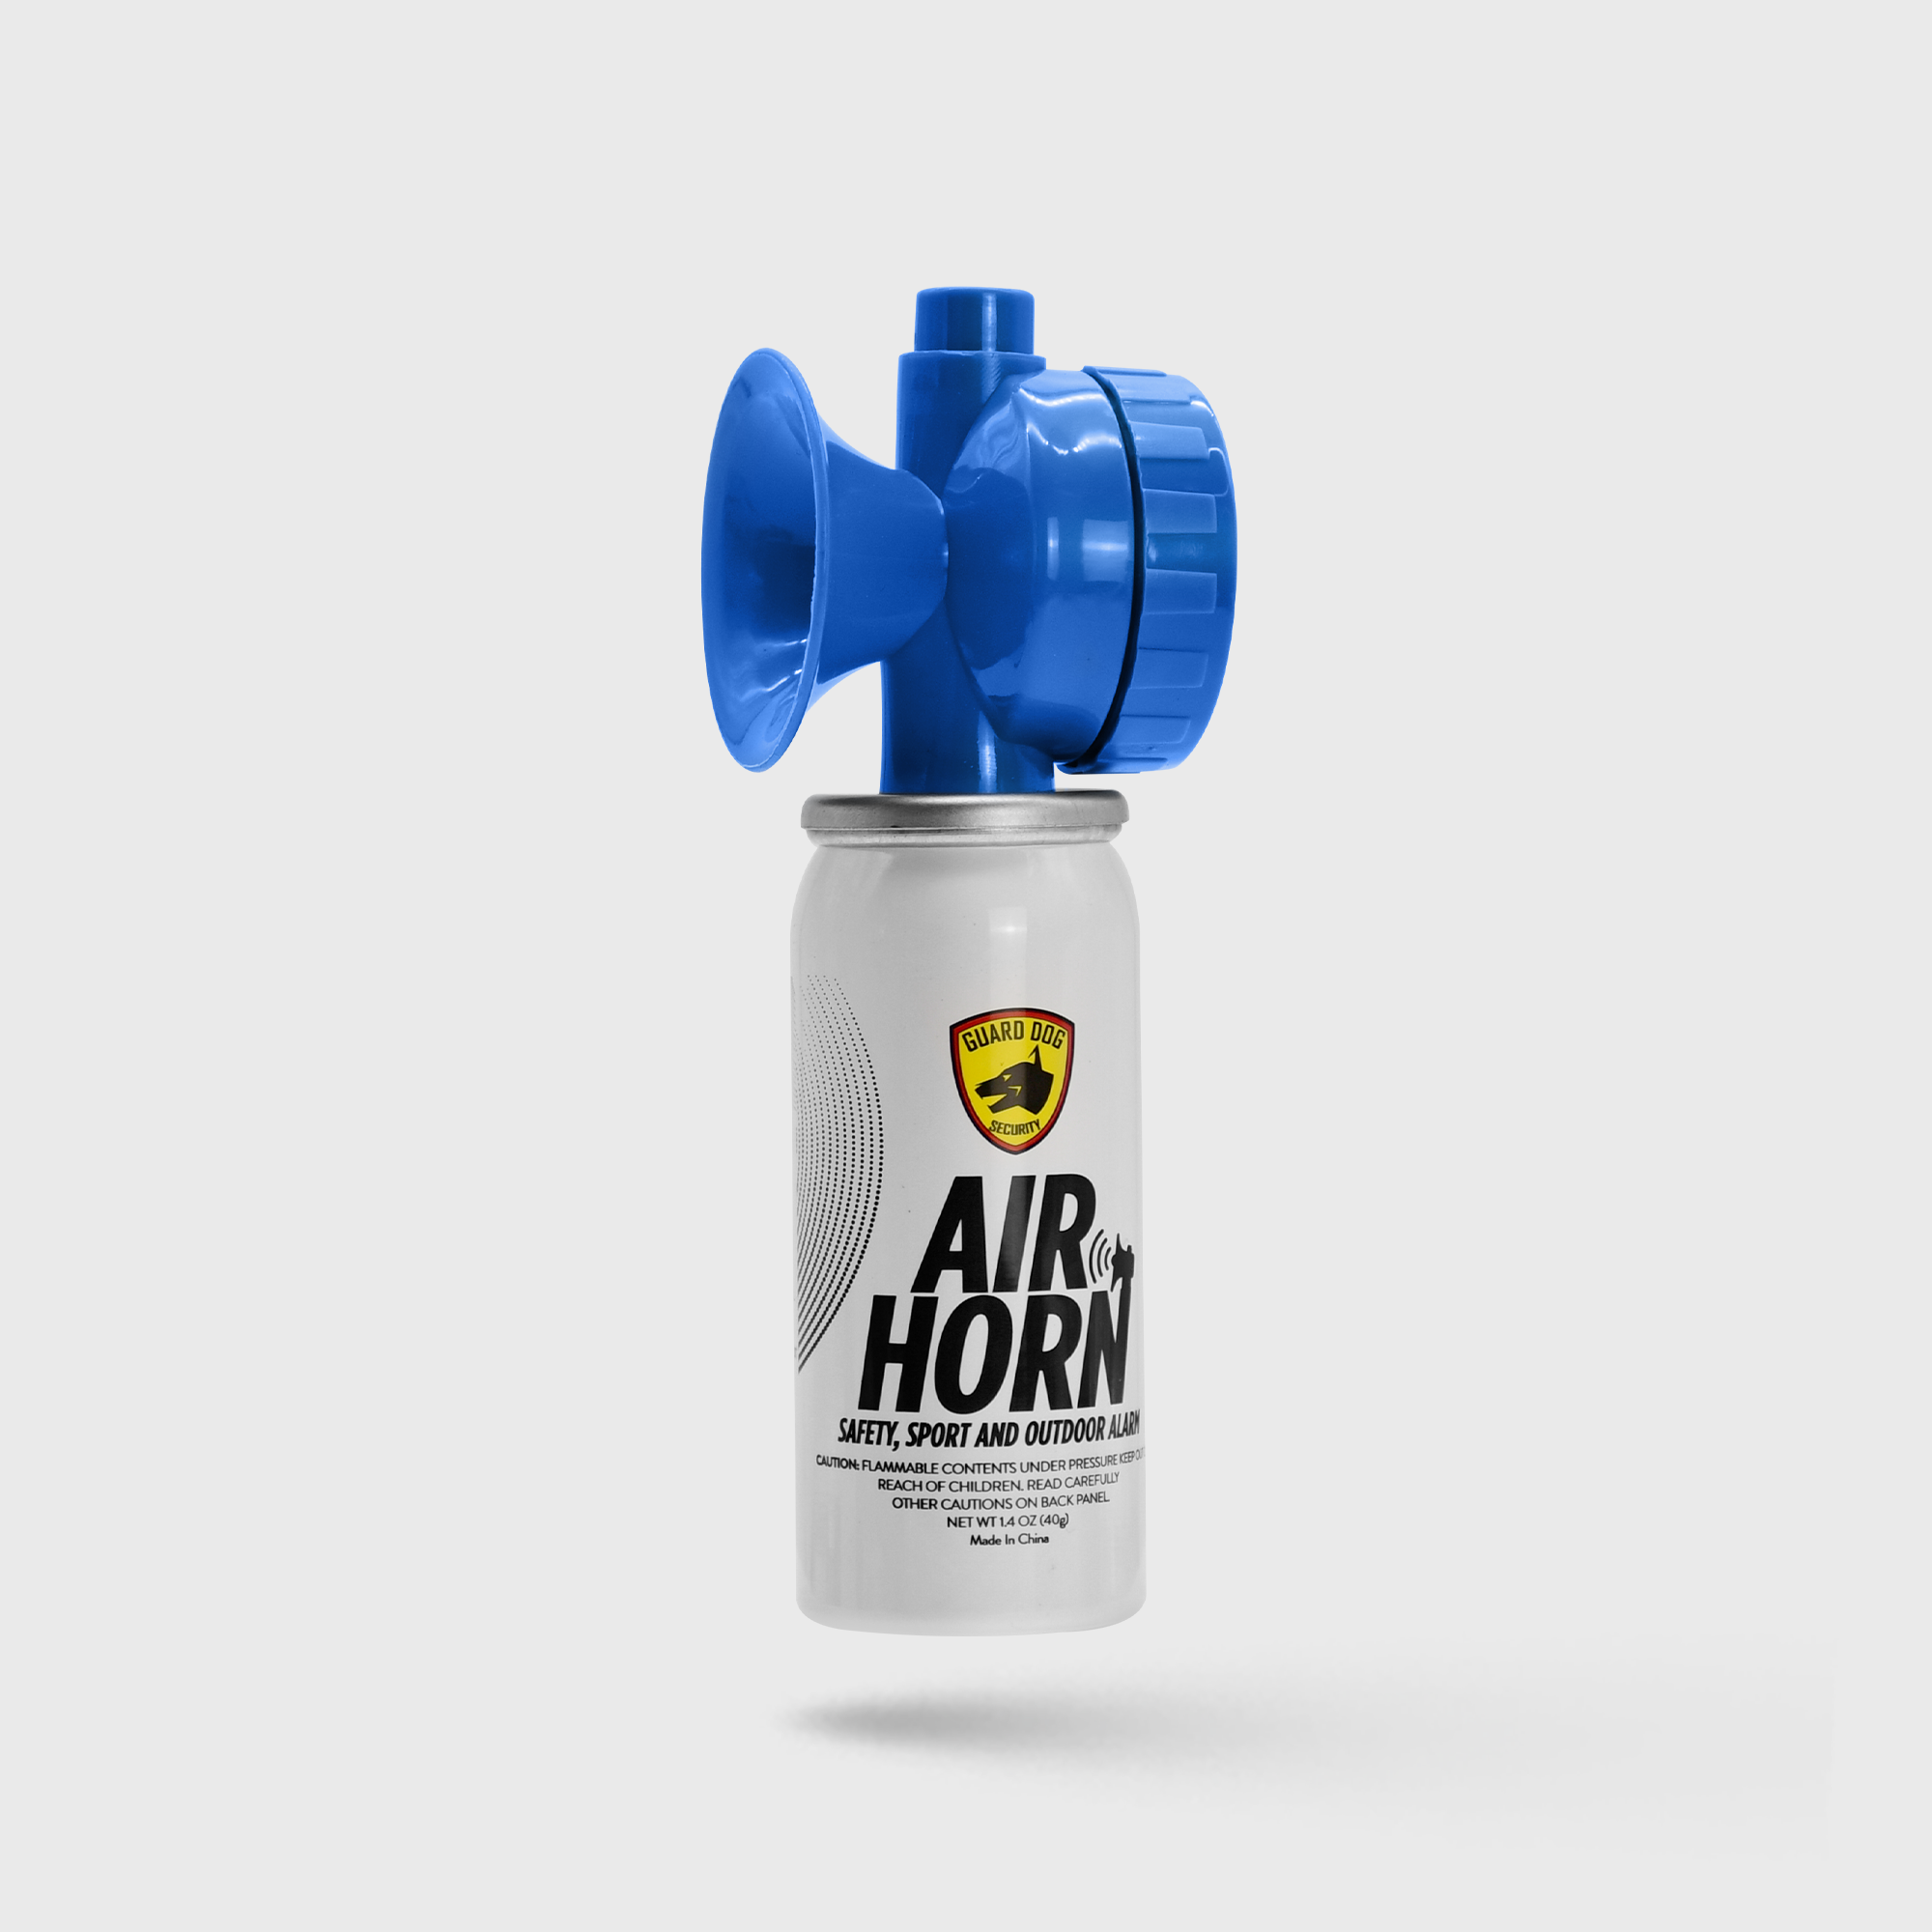 Buy Air Horn 1.4 oz online  1-mile away safety and Outdoor Alarm